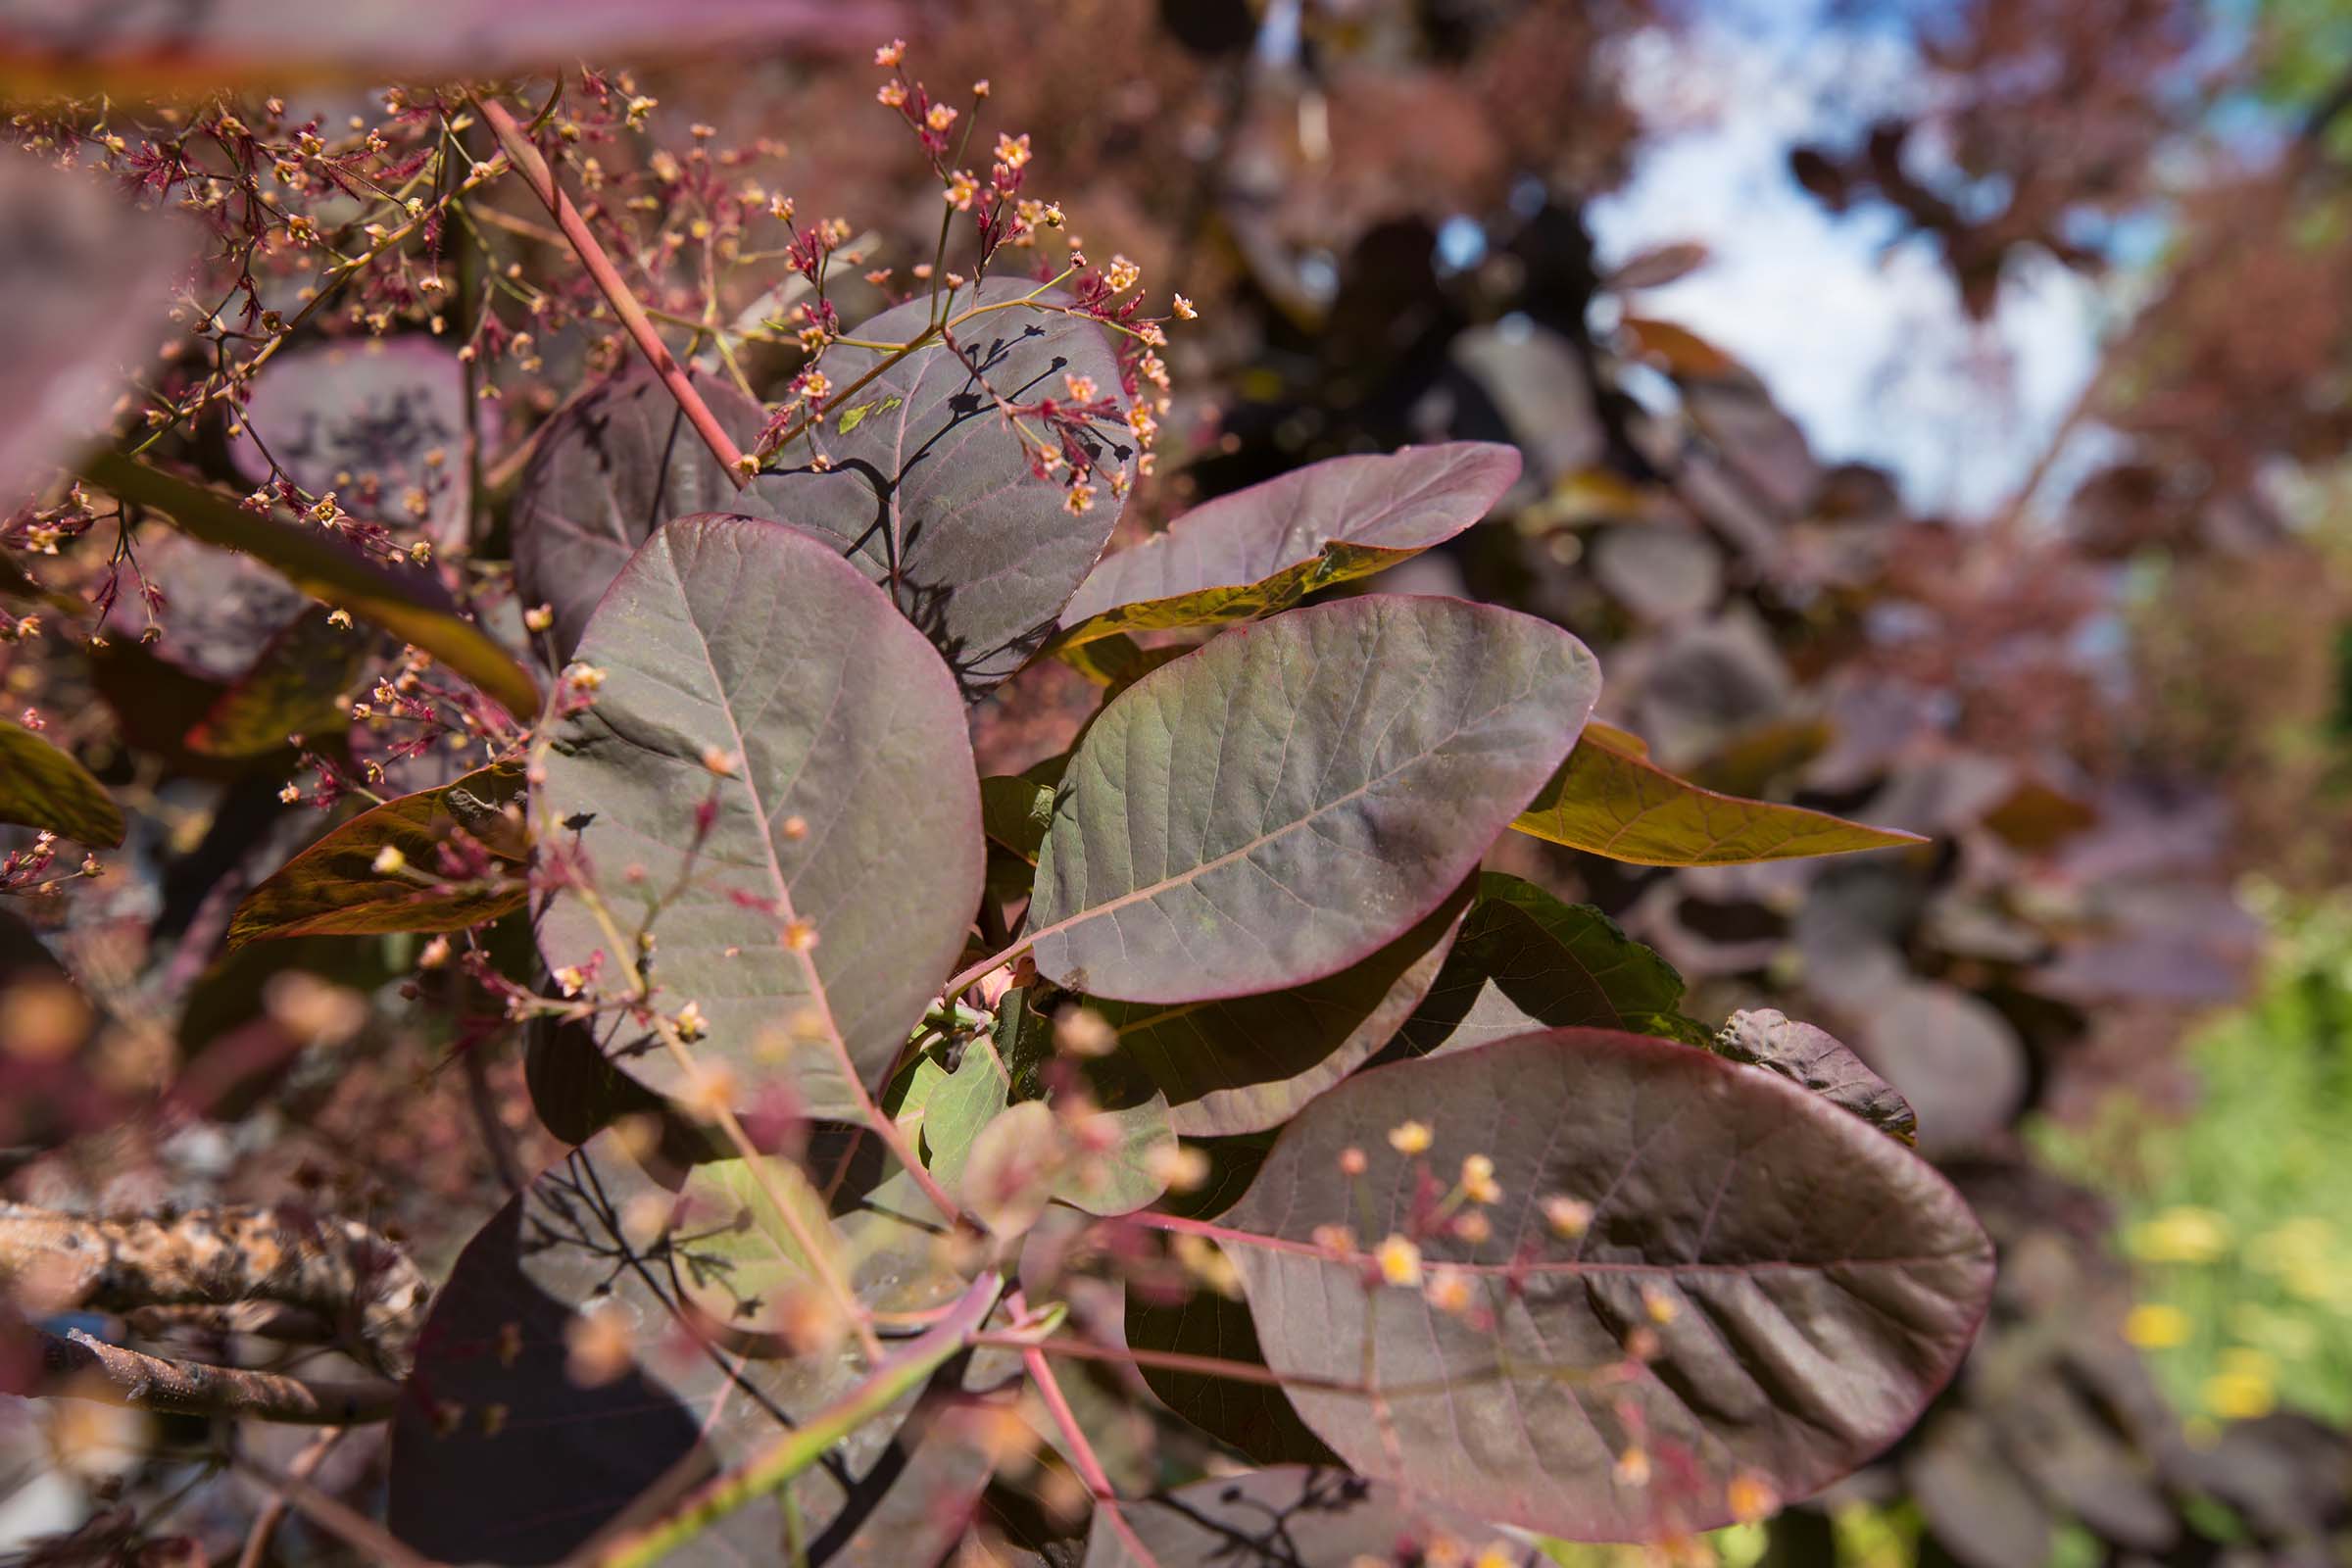 A closeup of the smoketree's leaves which are oval and smooth with reddish green hues